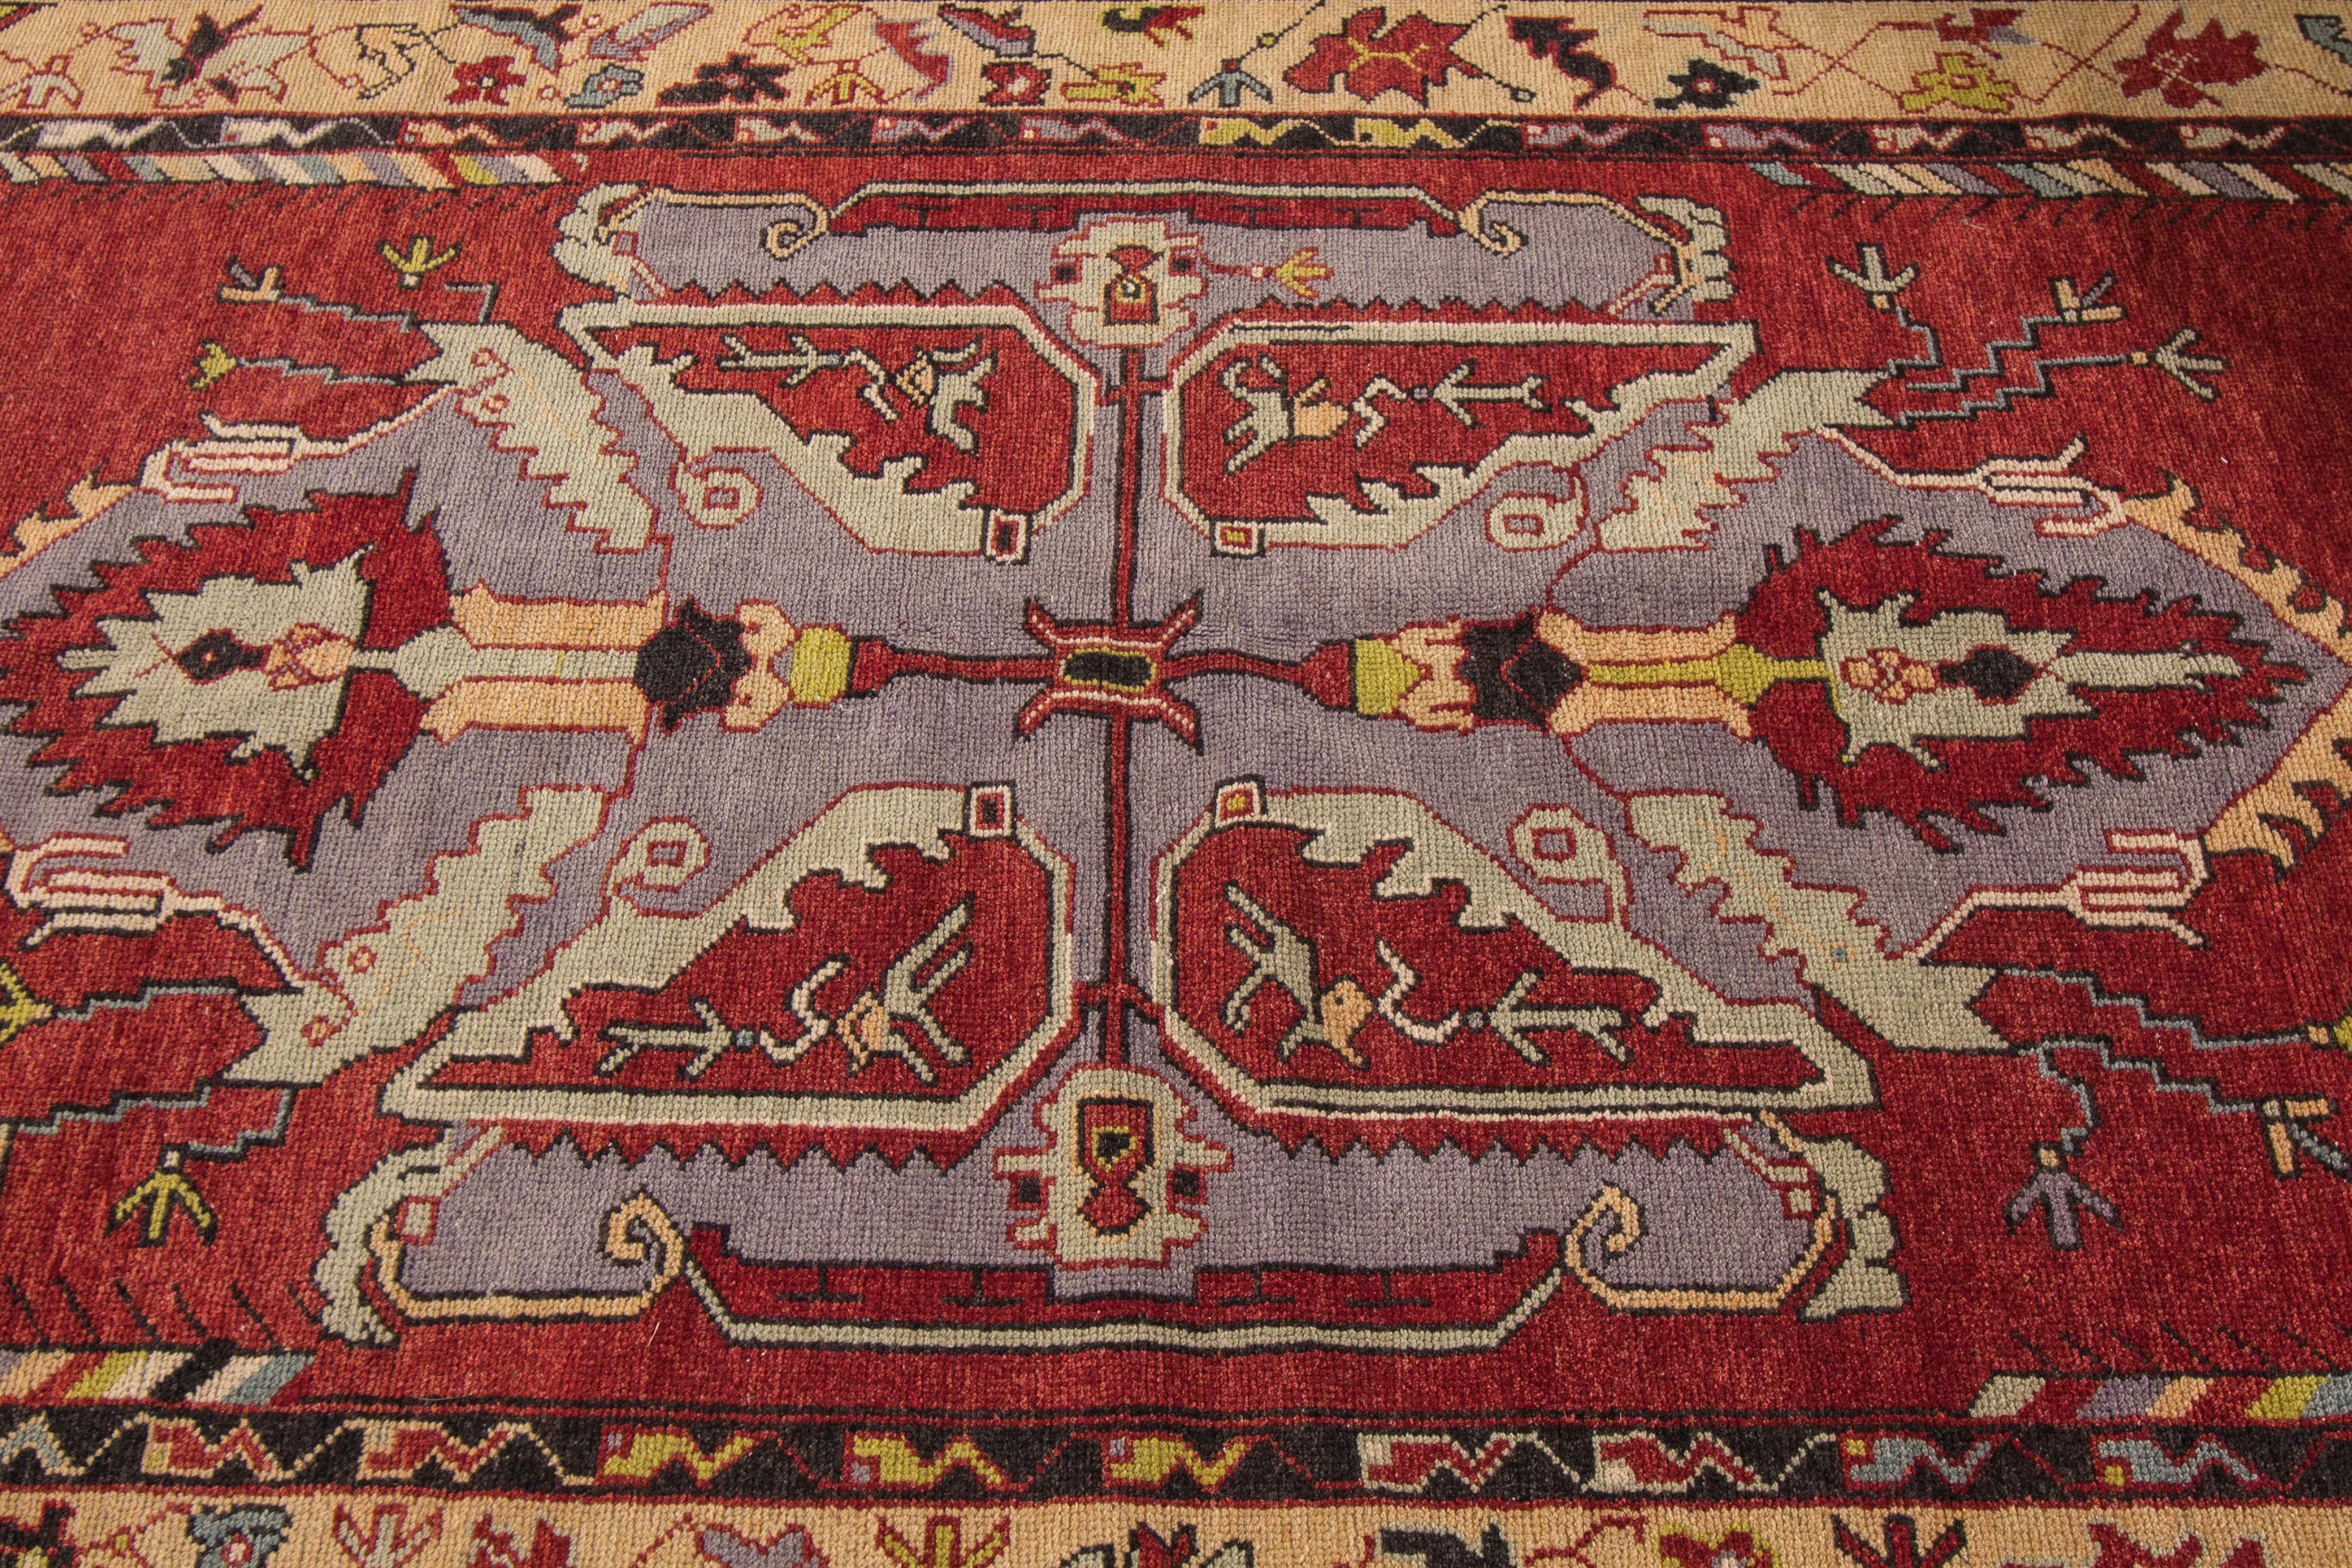 This hand knotted Anatolian rug, made in late 20th century Turkey, is characterized by a comely and highly representative Anatolian composition. This vintage rug beautifully communicates the finer strengths of Anatolian rug-weaving. Building on